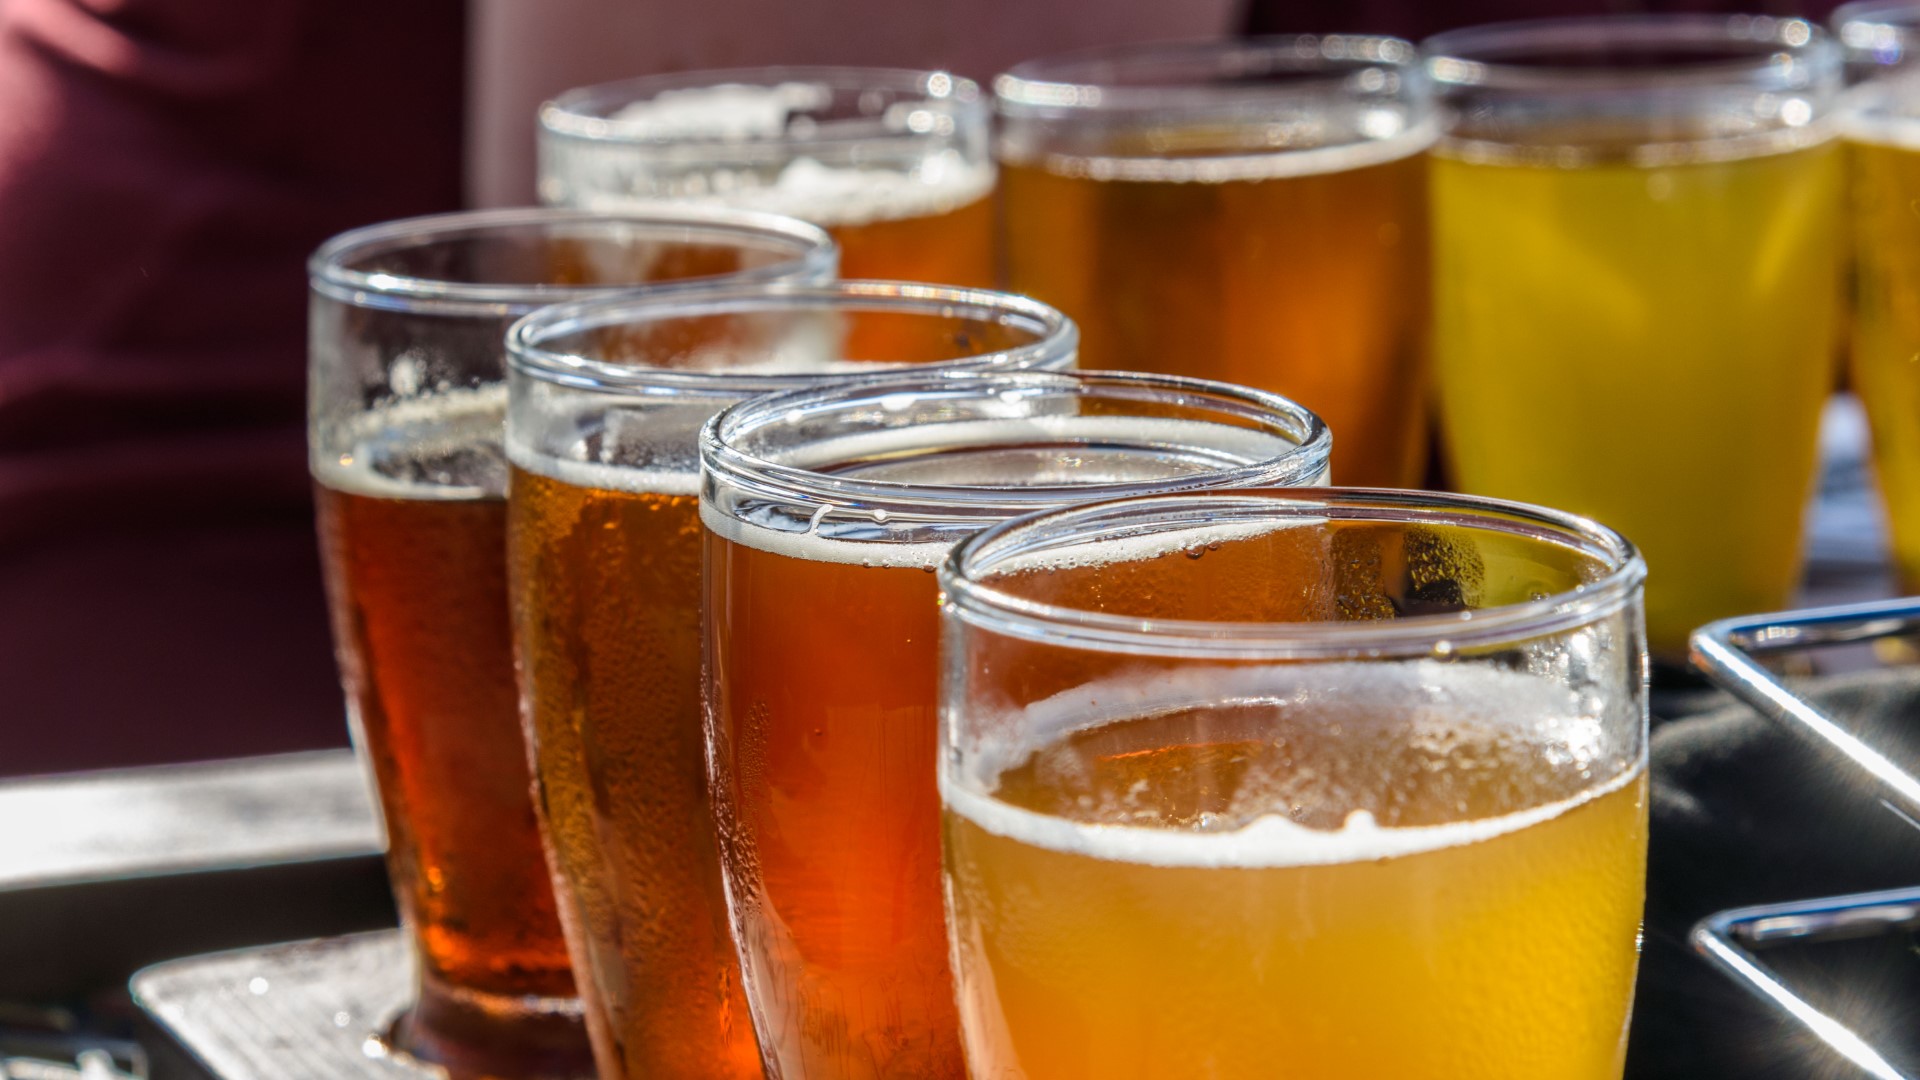 Beer lovers can experience more than 200 beer-related events, including tastings, pairings, tours and more.